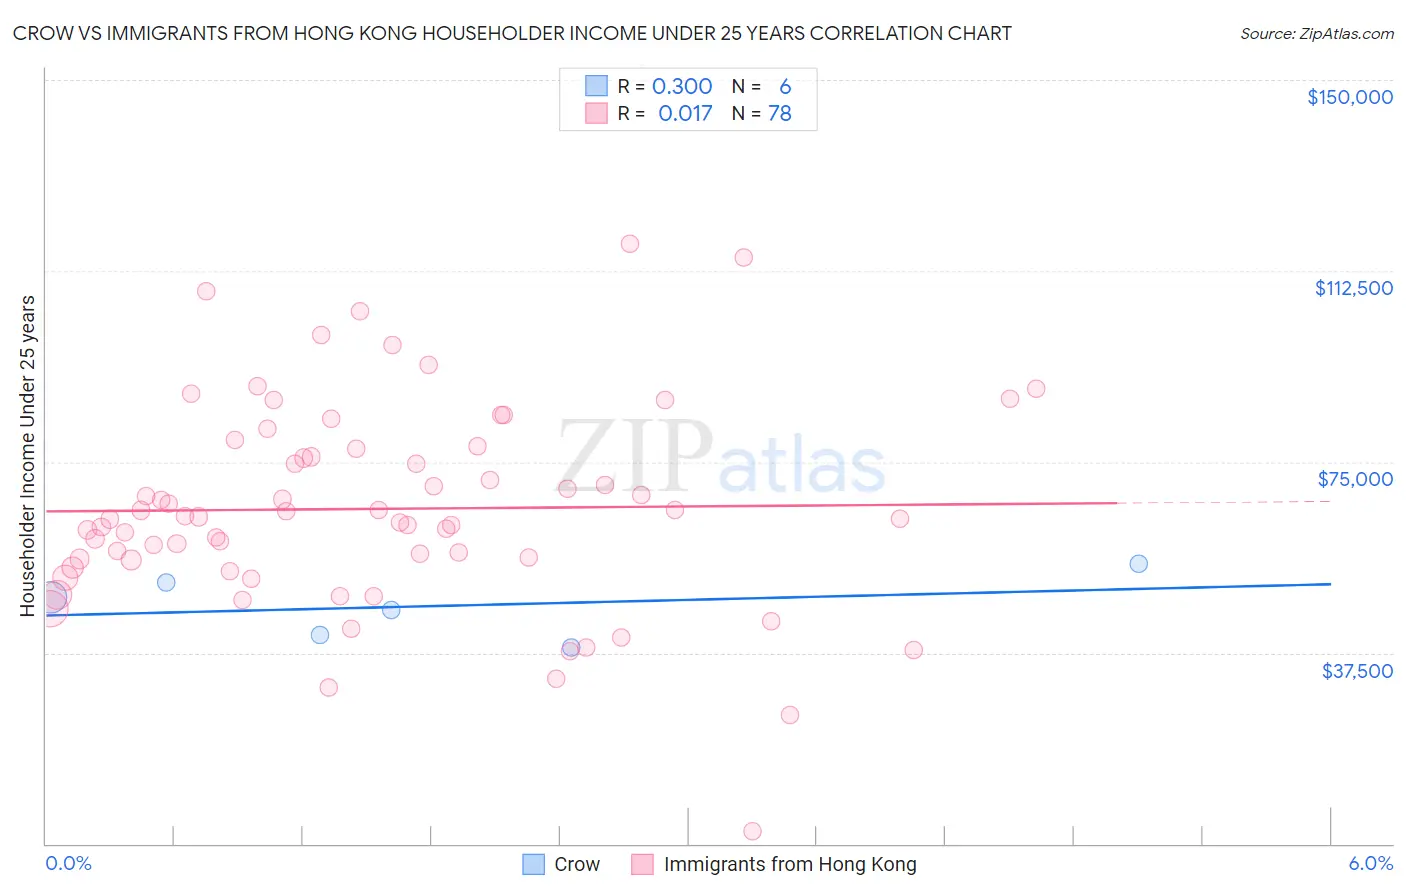 Crow vs Immigrants from Hong Kong Householder Income Under 25 years